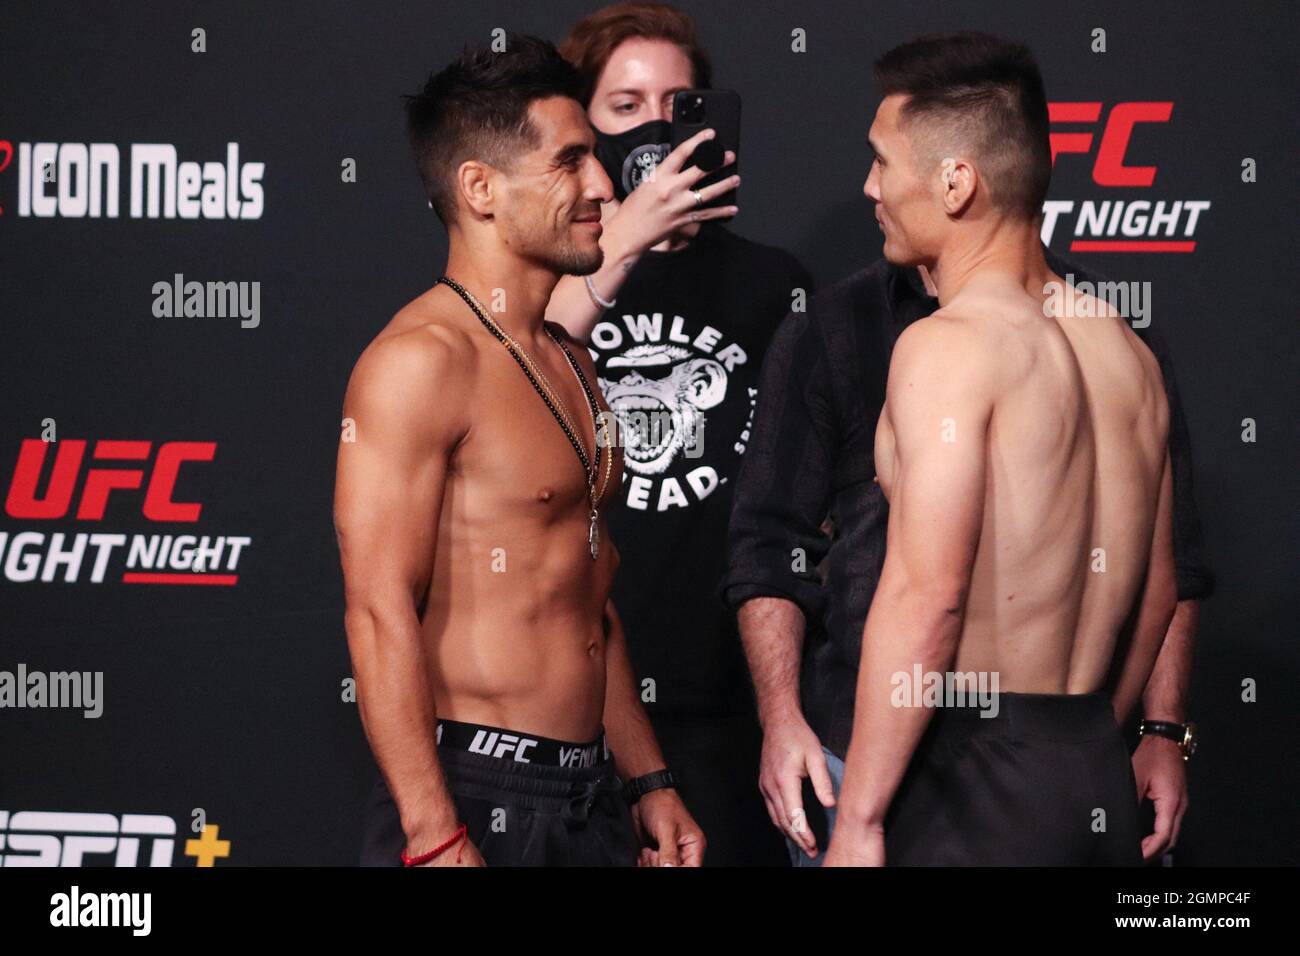 Las Vegas, NV - September 17: (L-R) Opponents Gustavo Lopez and Heili Alateng face off during the UFC Vegas 37: Smith v Spann Weigh-in at UFC Apex on September 17, 2021 in Las Vegas, Nevada, United States. Photo by Diego Ribas/PxImages/ABACAPRESS.COM Stock Photo